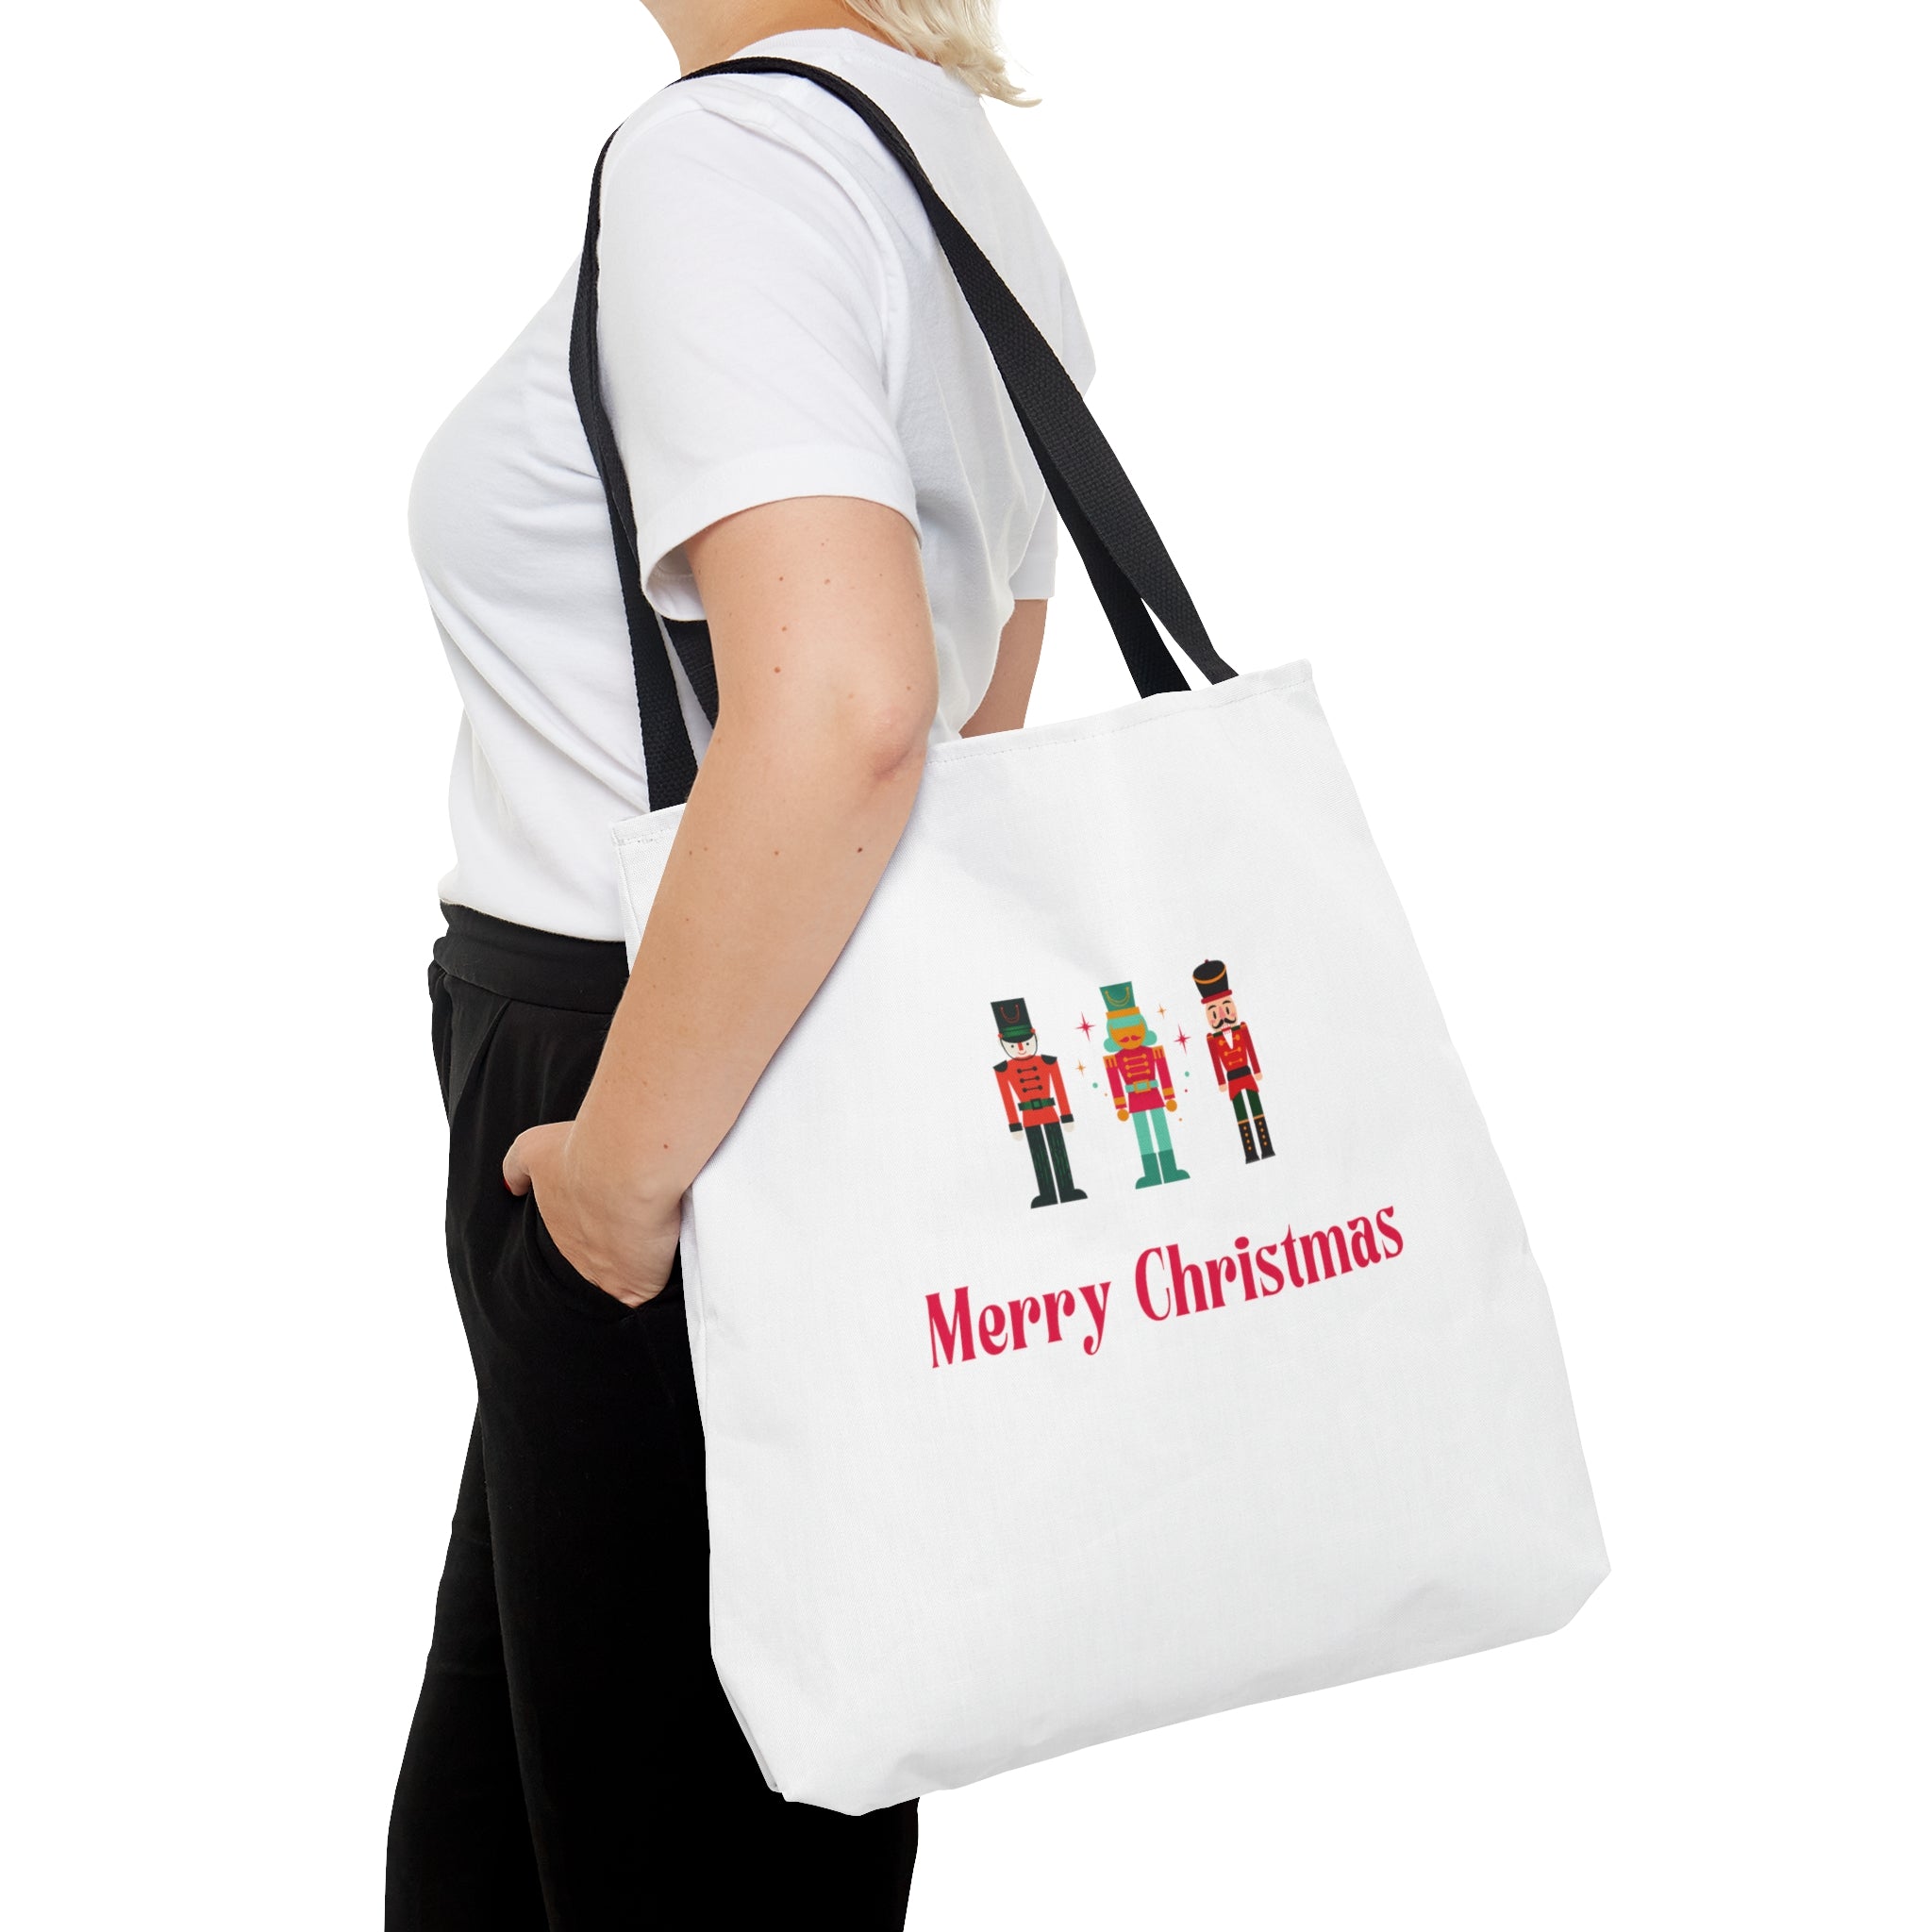 Merry Christmas Stylish Tote Bags White, Reusable Canvas Tote Bags, Available in Different Size